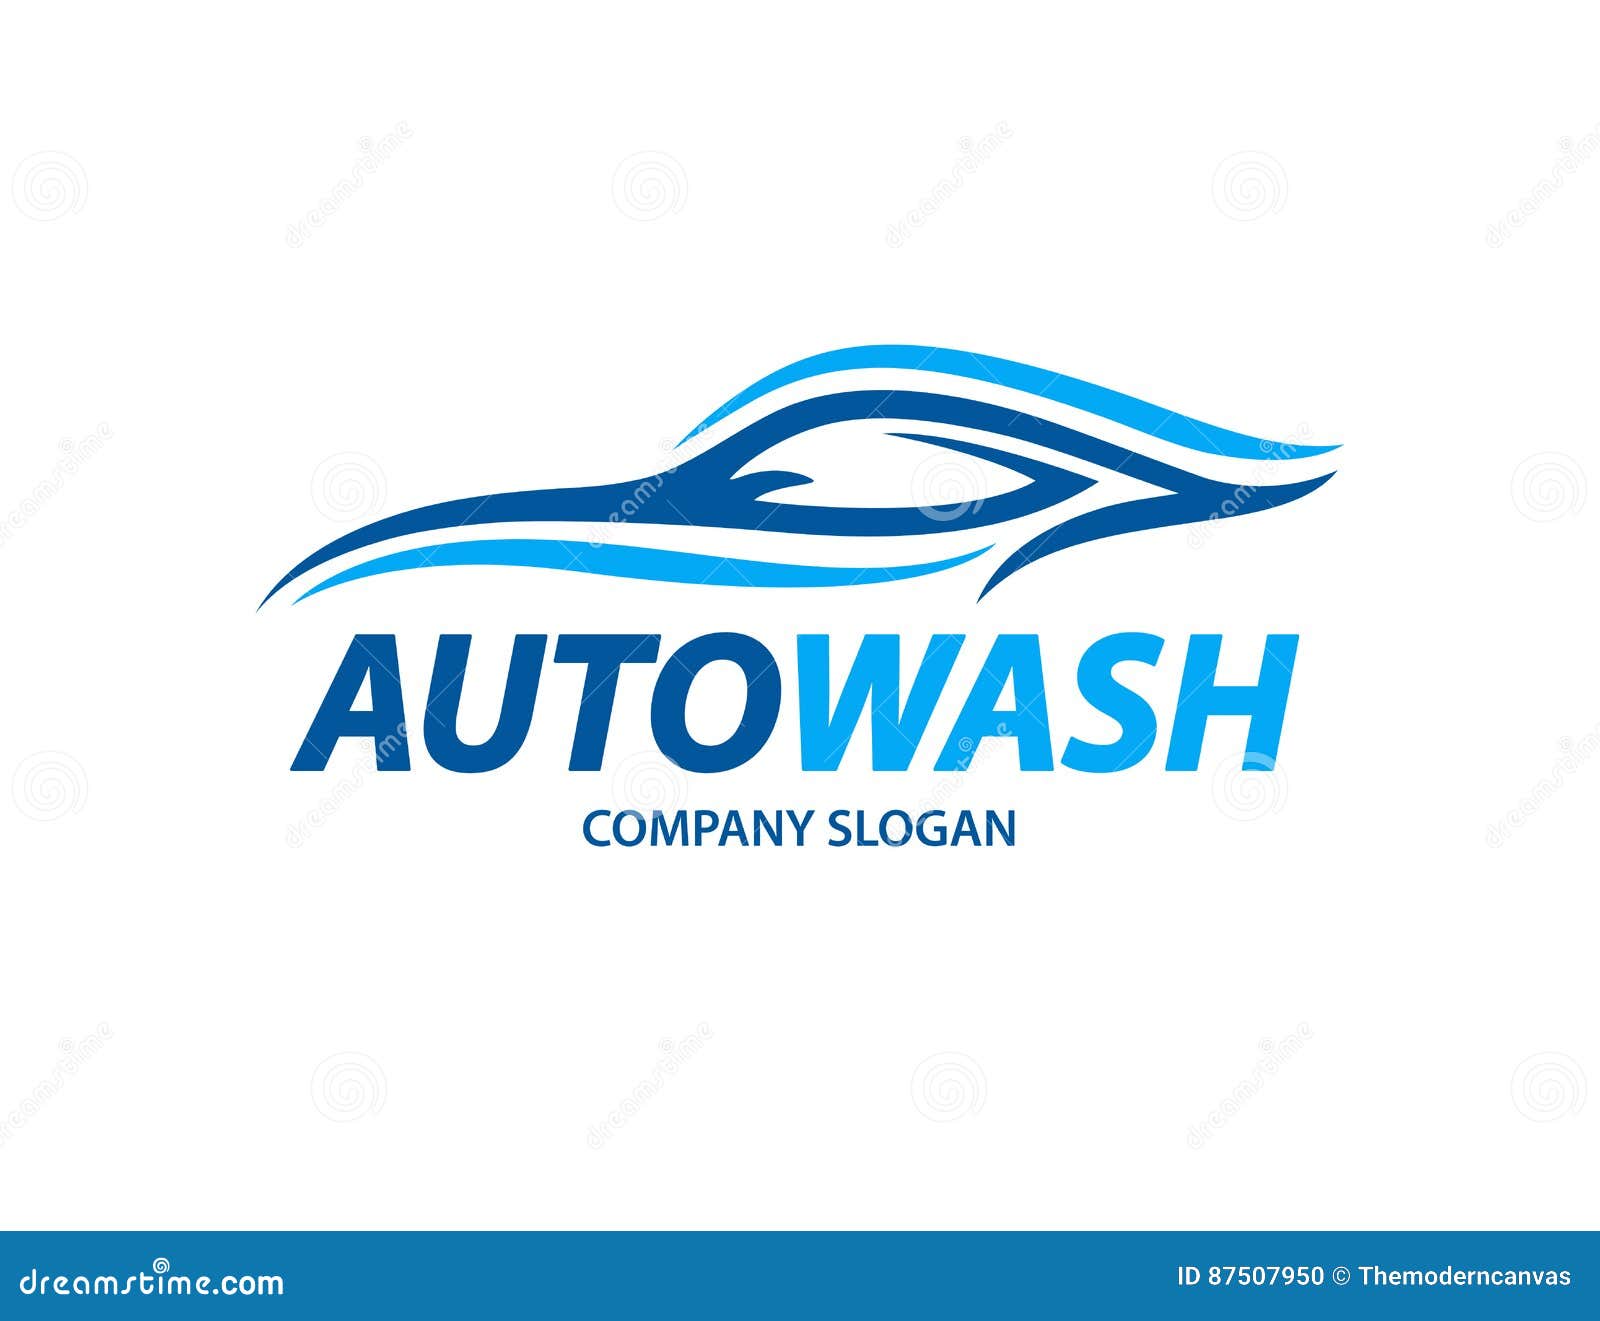 Automotive Carwash Logo Design with Abstract Sports Vehicle ...